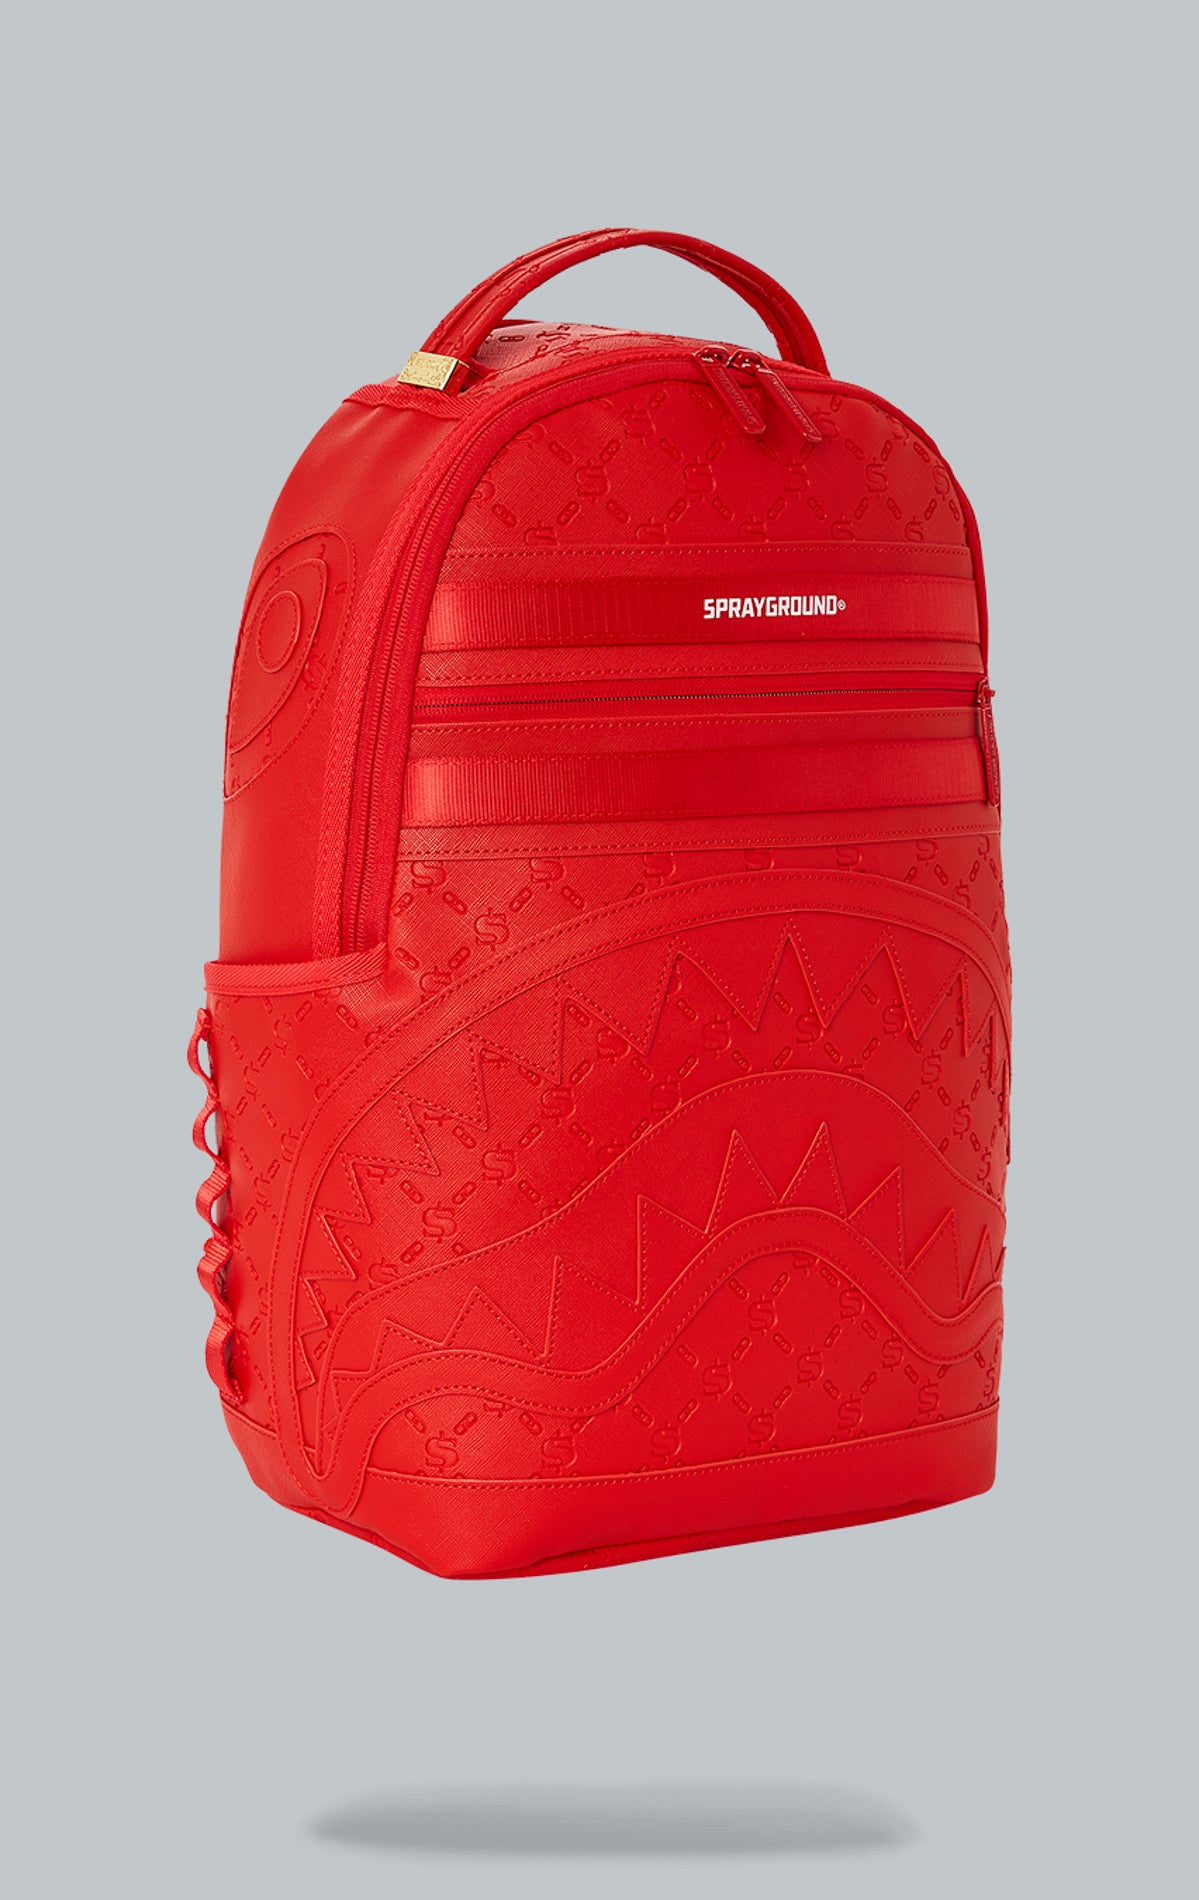 Sprayground Deniro Red Backpack. The backpack is made from durable water-resistant faux leather (100%) and features a red exterior. It includes a front zipper pocket, side pockets, a zippered stash pocket, a separate velour sunglass compartment, ergonomic mesh back padding, adjustable straps, gold zippers with metal hardware, and a metal 